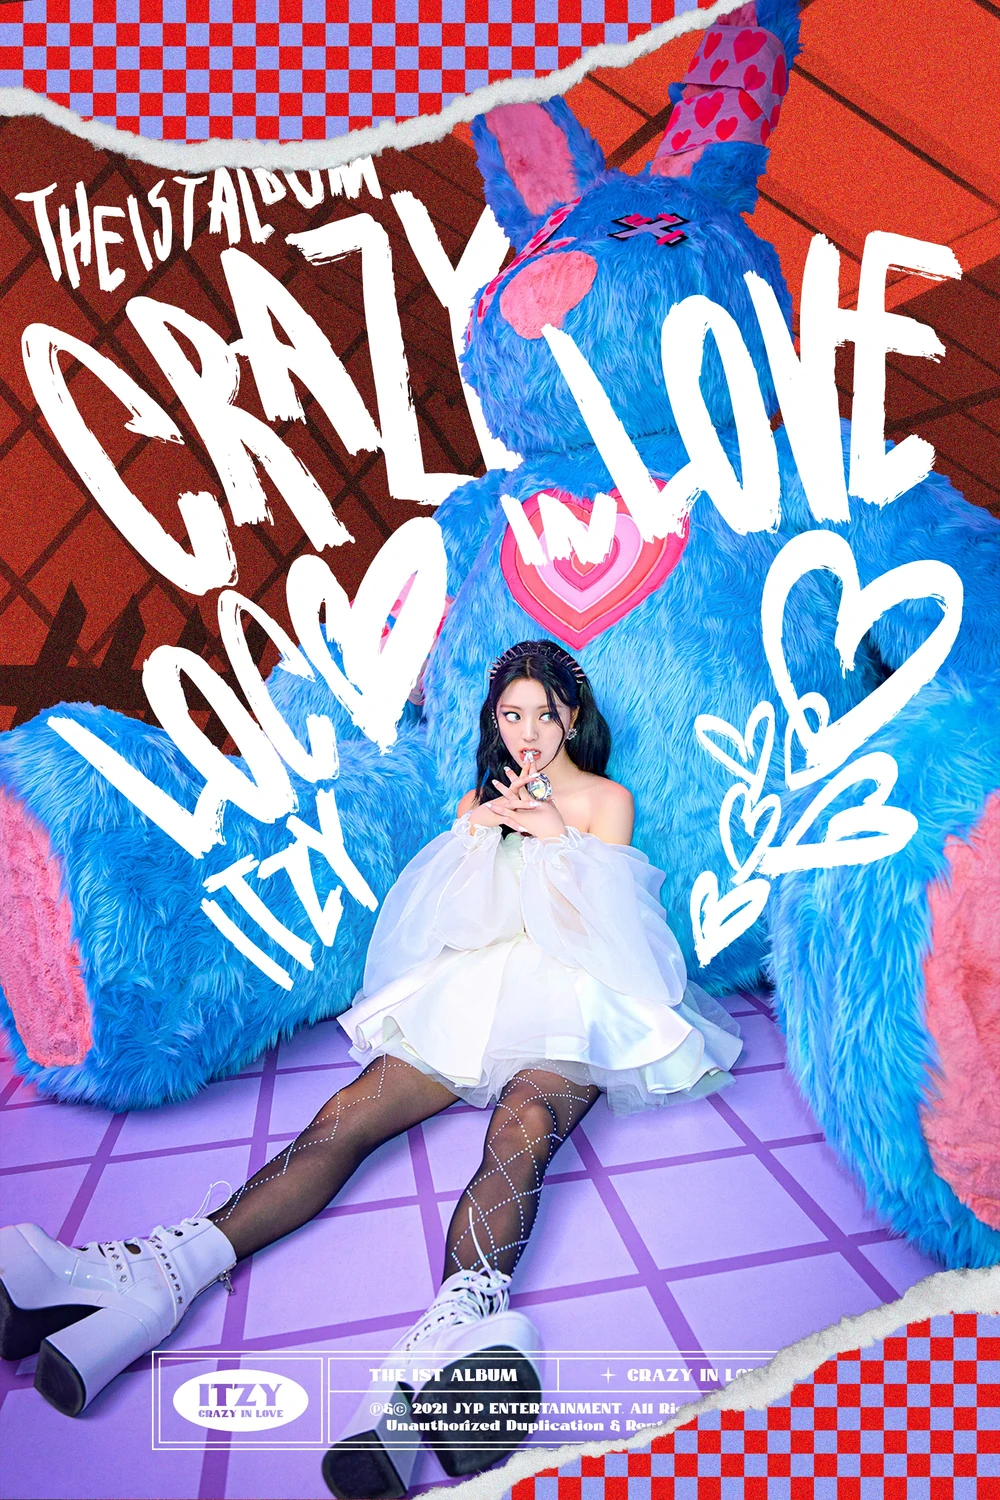 Itzy Crazy In Love Yuna Concept Teaser Picture Image Photo Kpop K-Concept 1